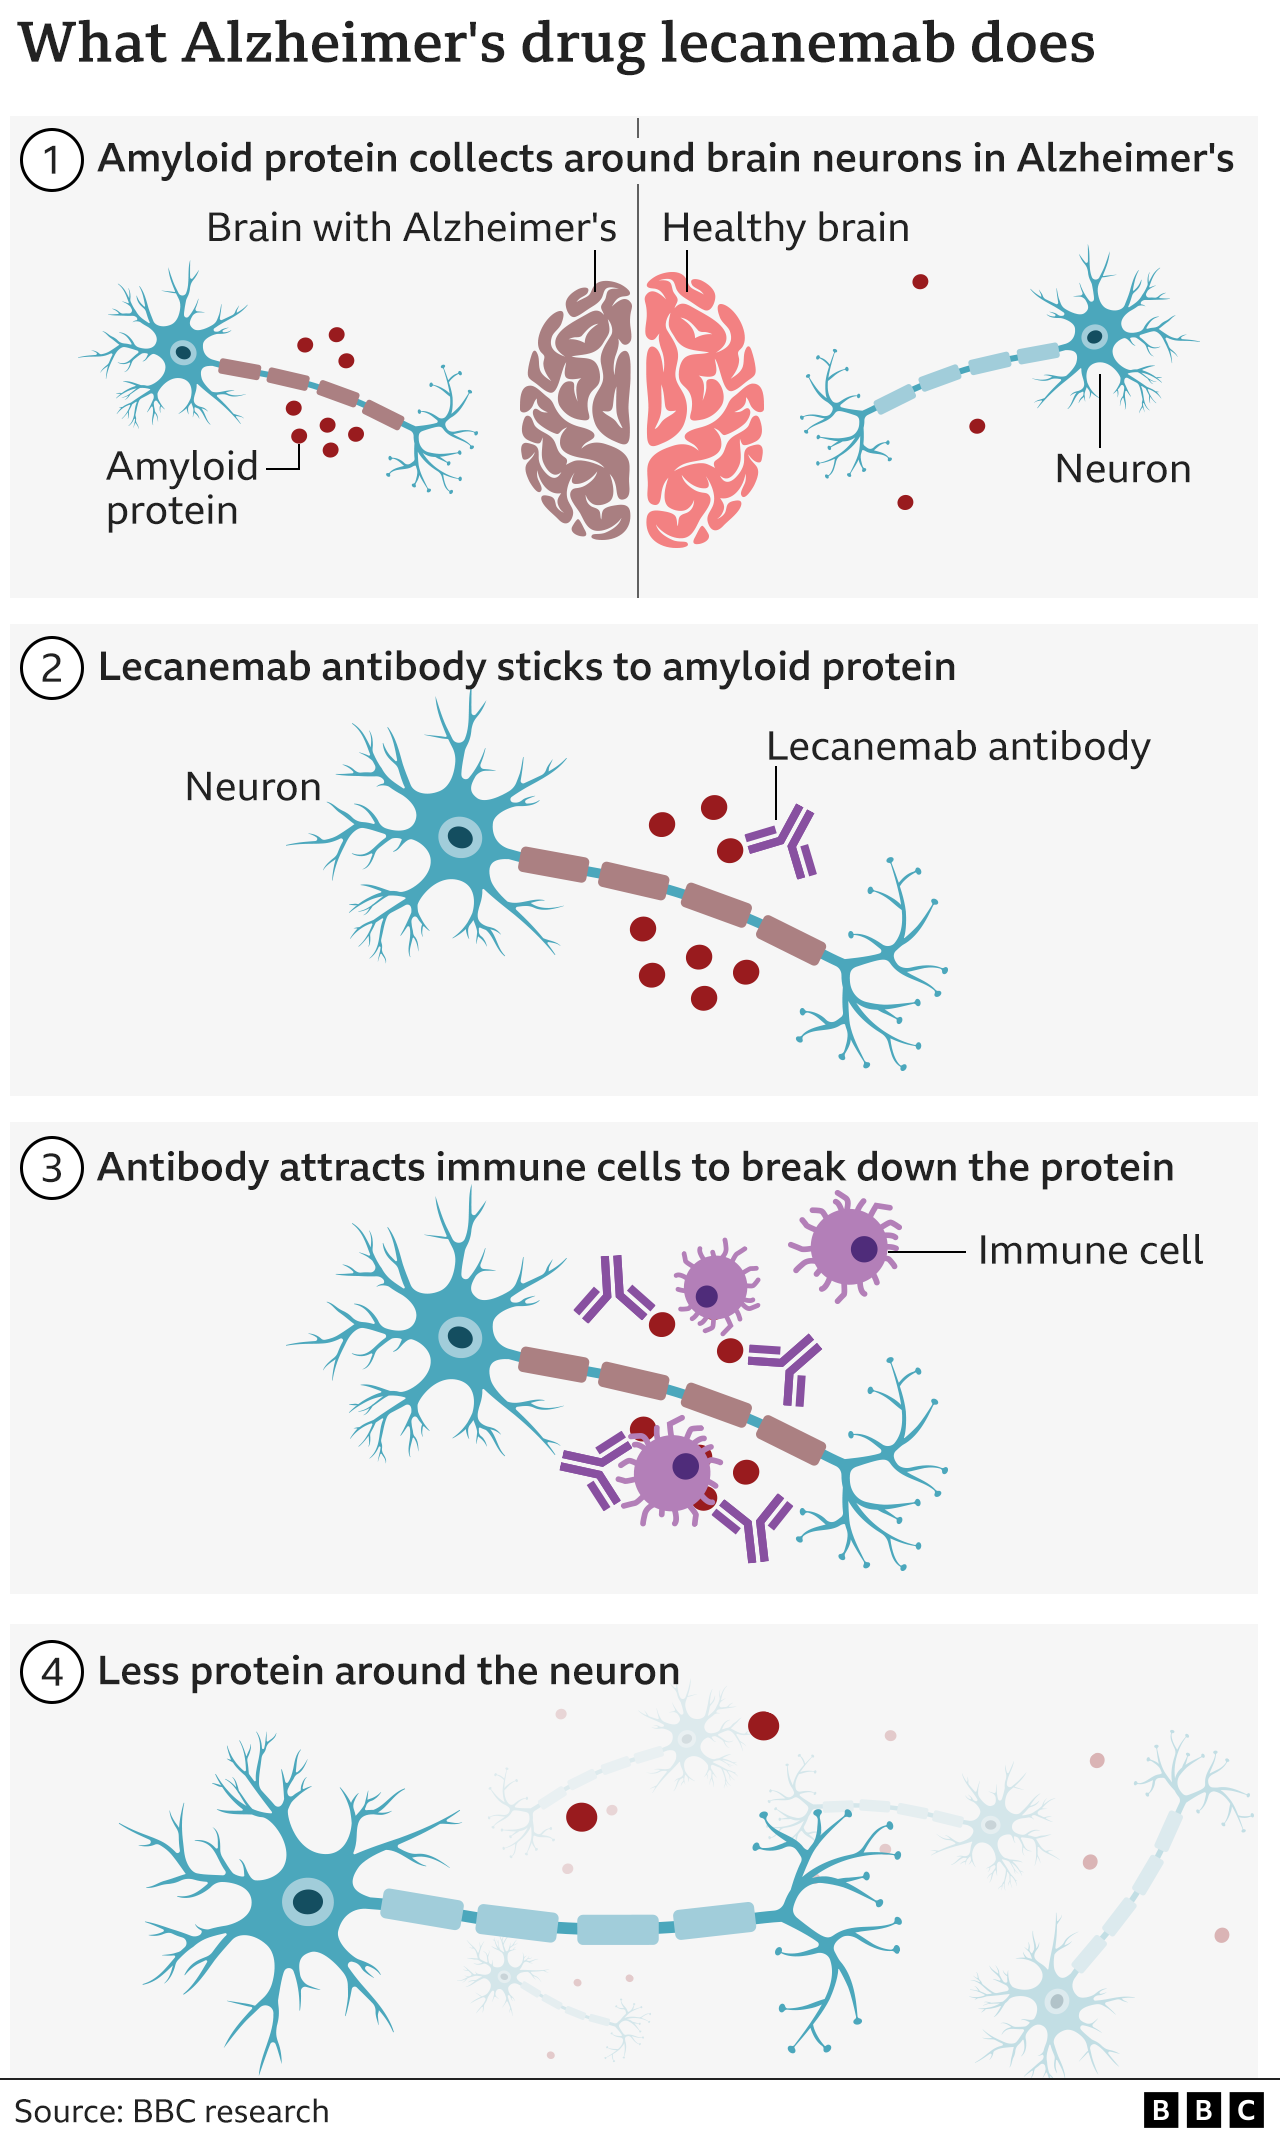 Graphic showing what the lecanemab antibody does - attaching itself to the ameloid proteins that are more present in brains affected by Alzheimer's than healthy brains and then attracting the body's immune cells which break down the protein